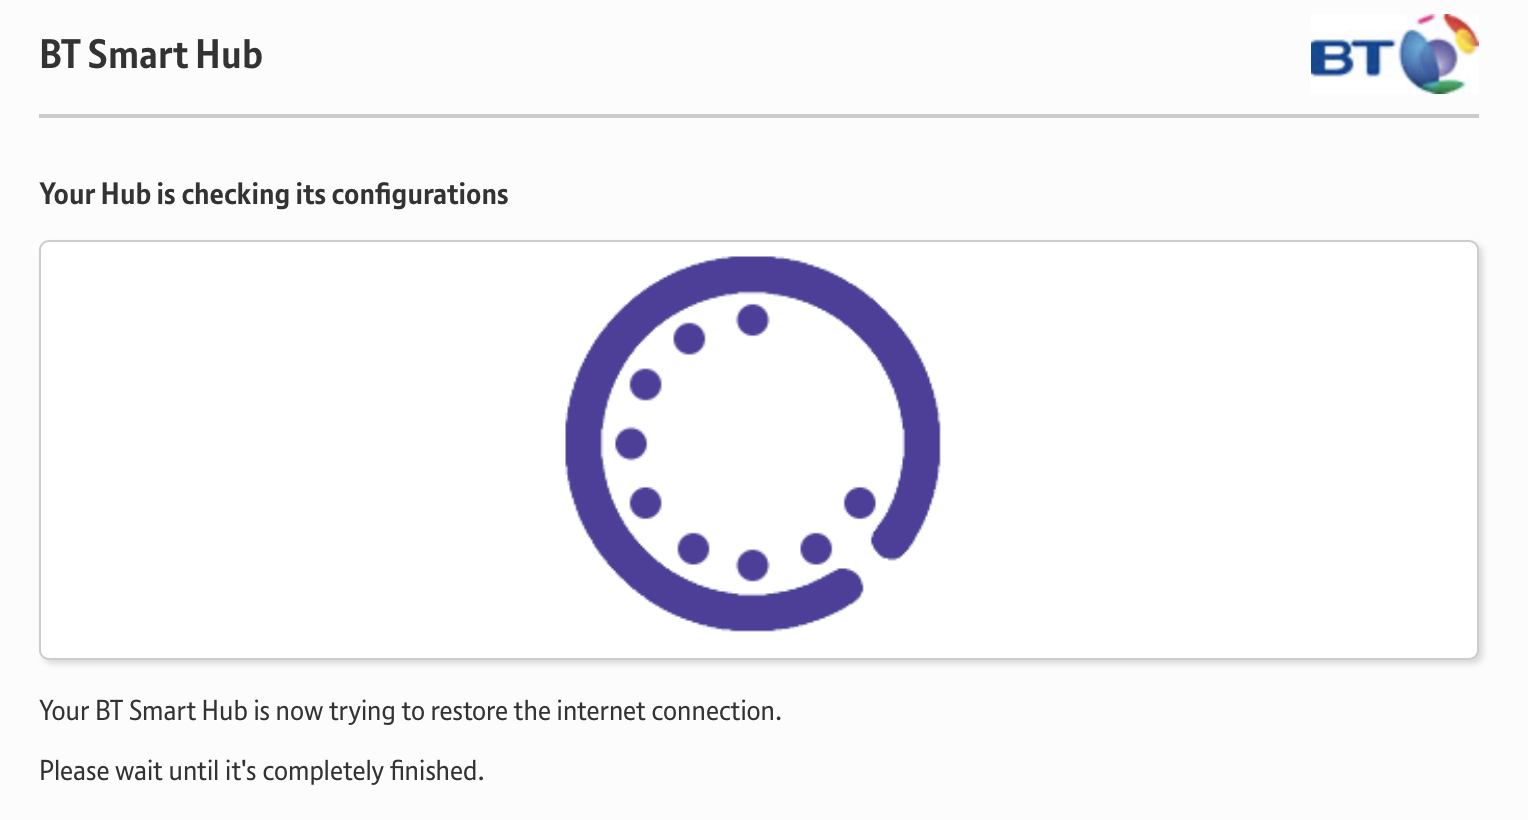 BT Smart Hub is checking its configuration, trying to restore the Internet connection